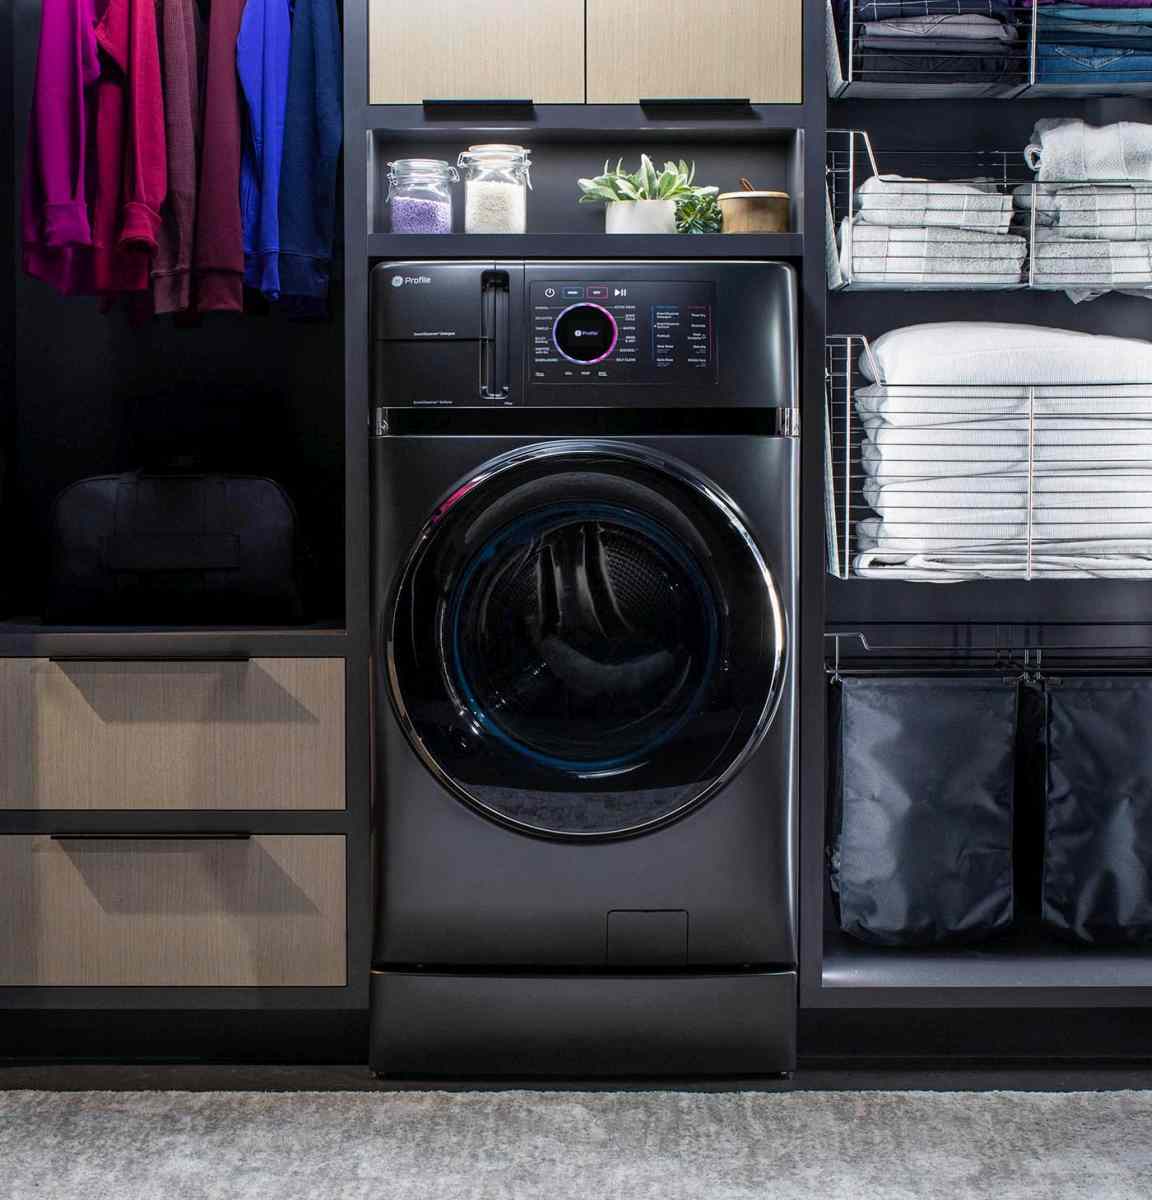 Are There Any Disadvantages Of Stacking Washers & Dryers?